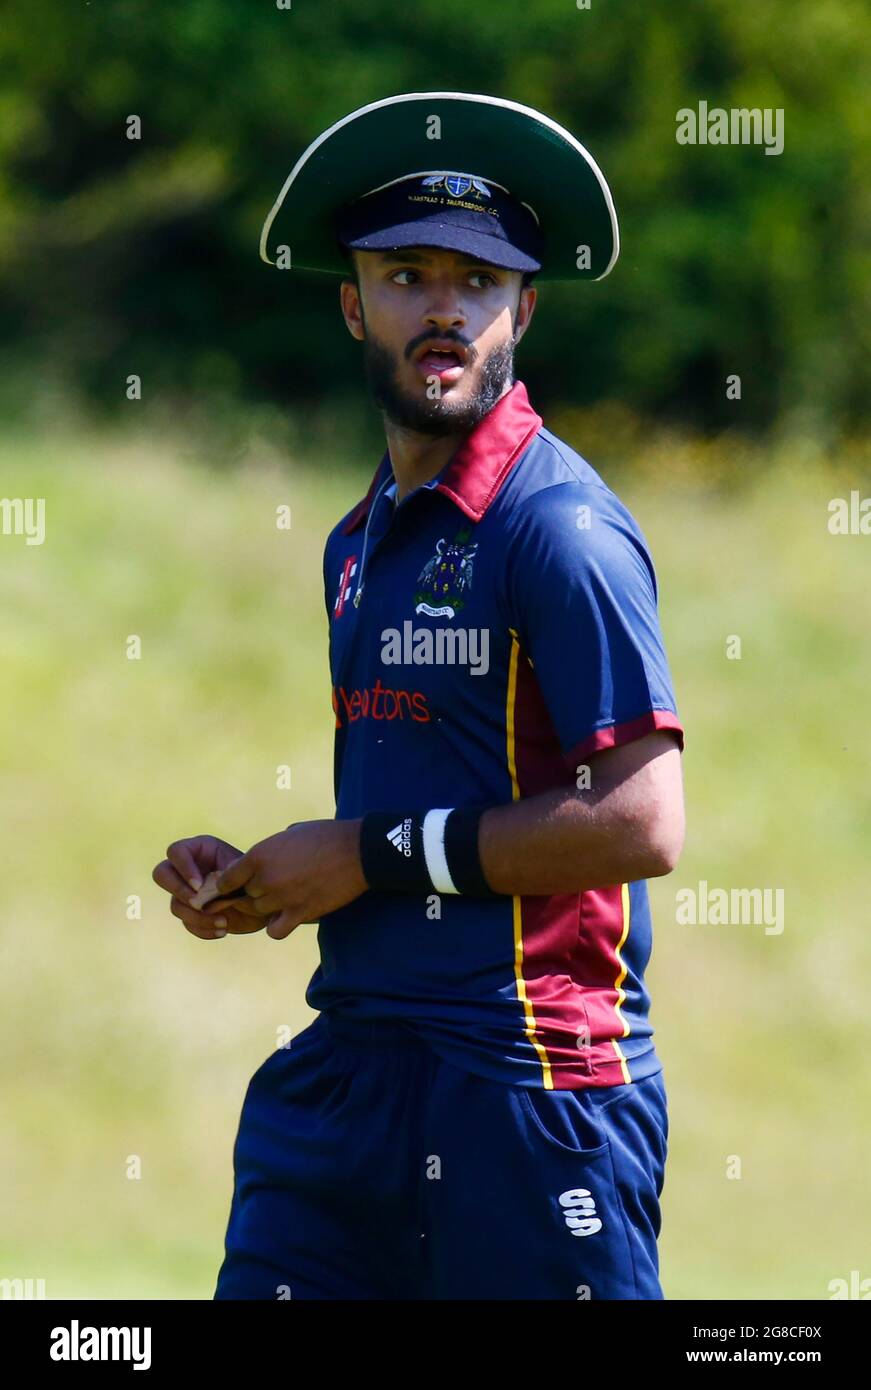 BILLERICAY, United Kingdom, JULY 18:Eshub Kalley of Wanstead cc during    Dukes Essex T20 Competition - Final between Wanstead and Snaresbrook CC and Stock Photo